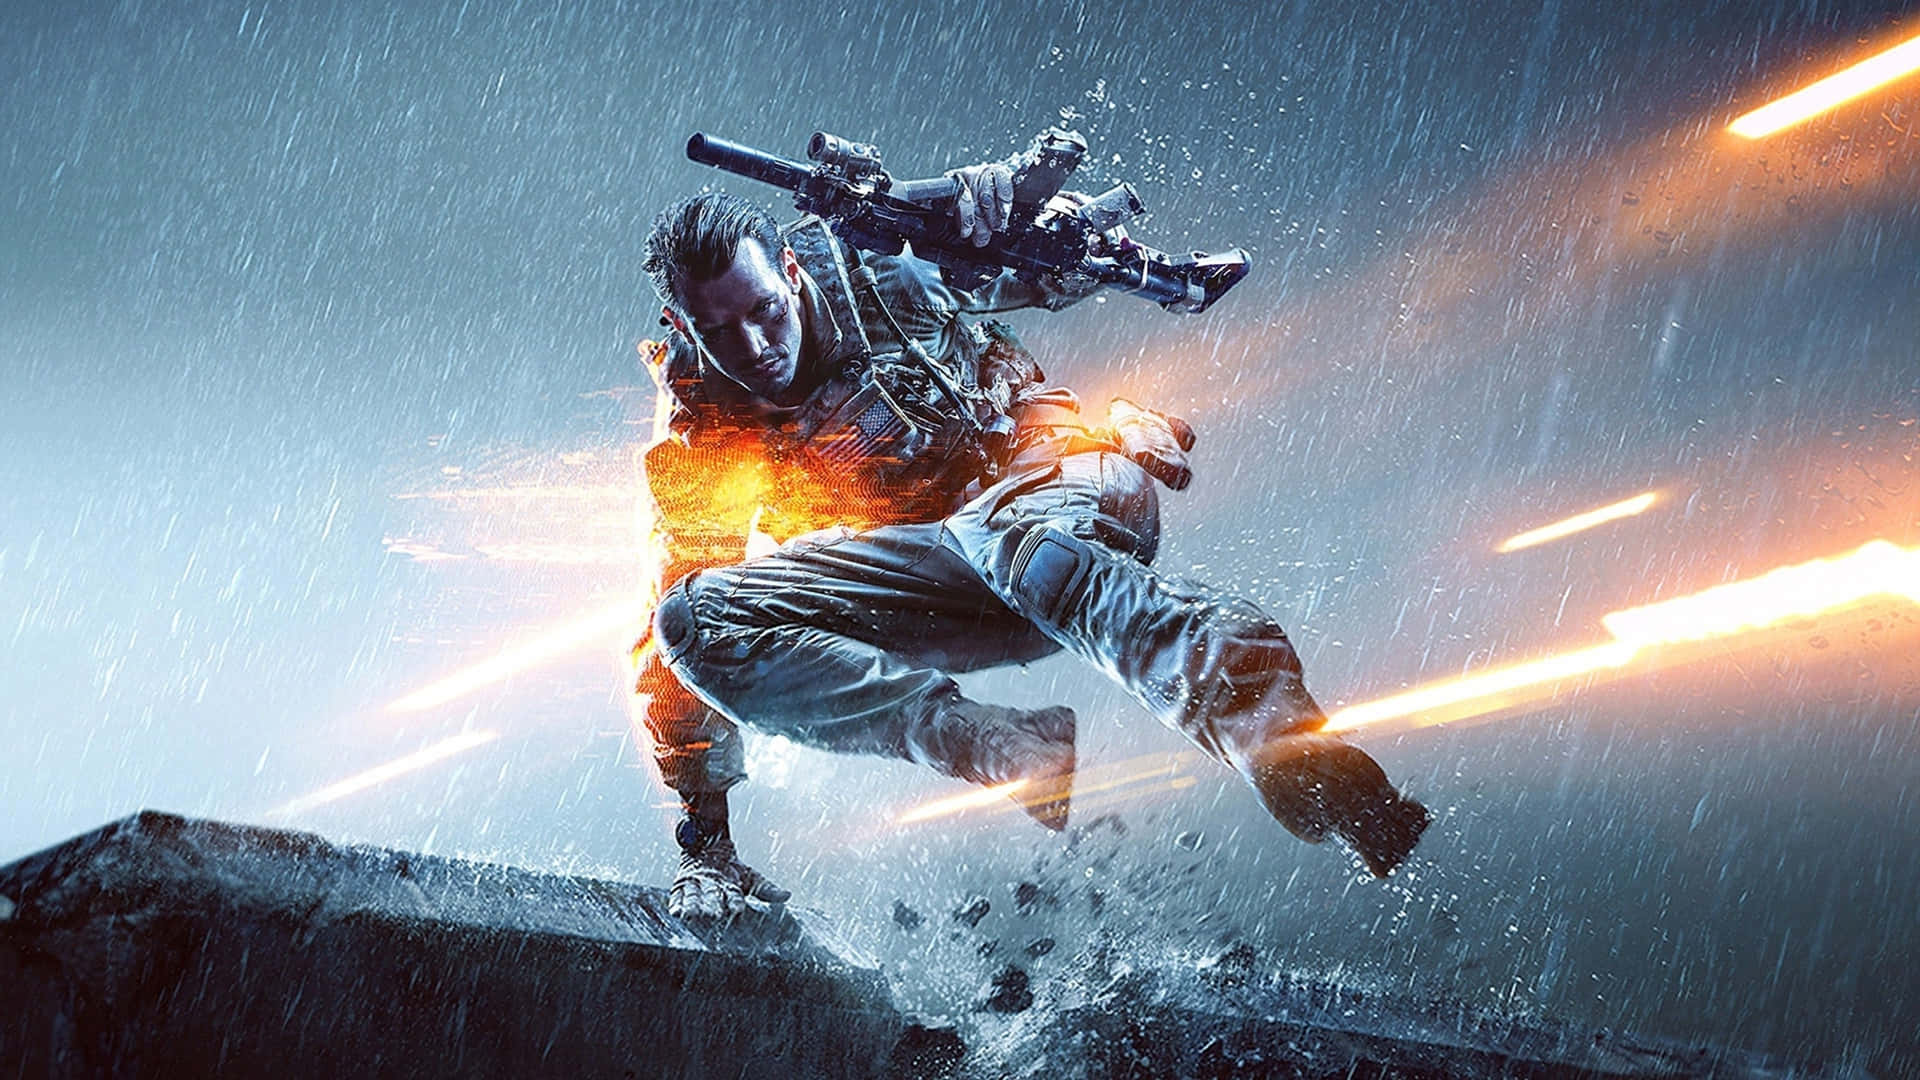 Bf4 Wallpaper (77+ images)